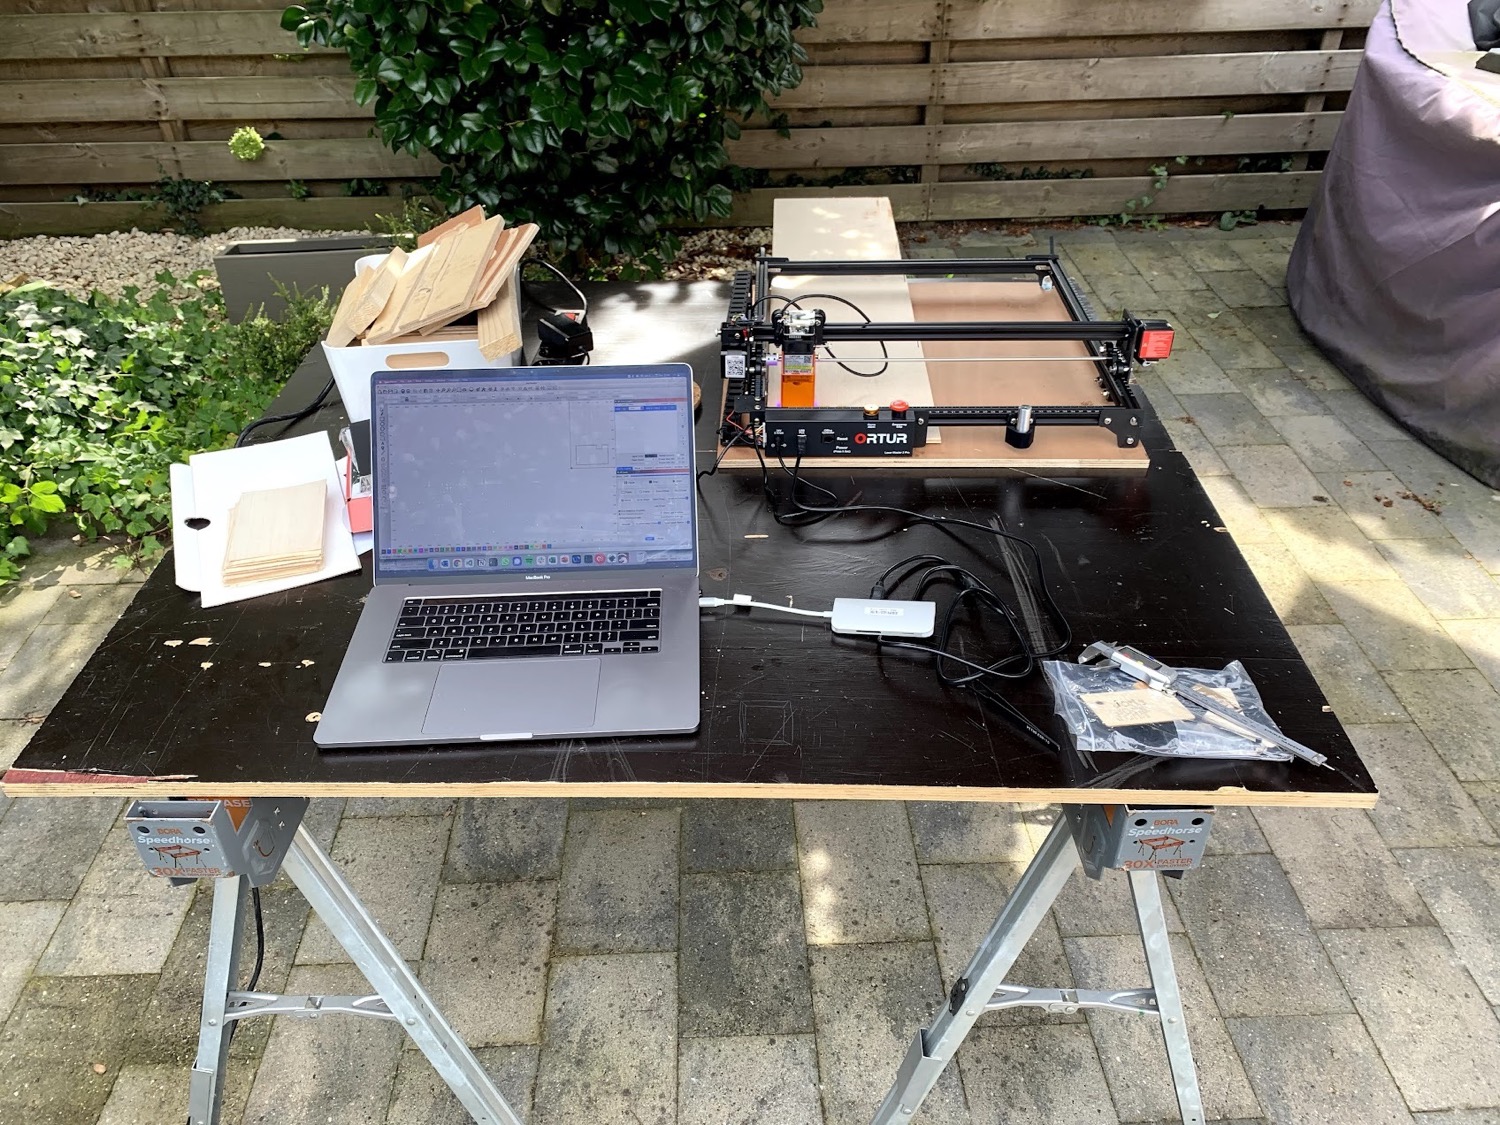 Laser cutting setup - outside, because laser cutting produces nasty fumes!